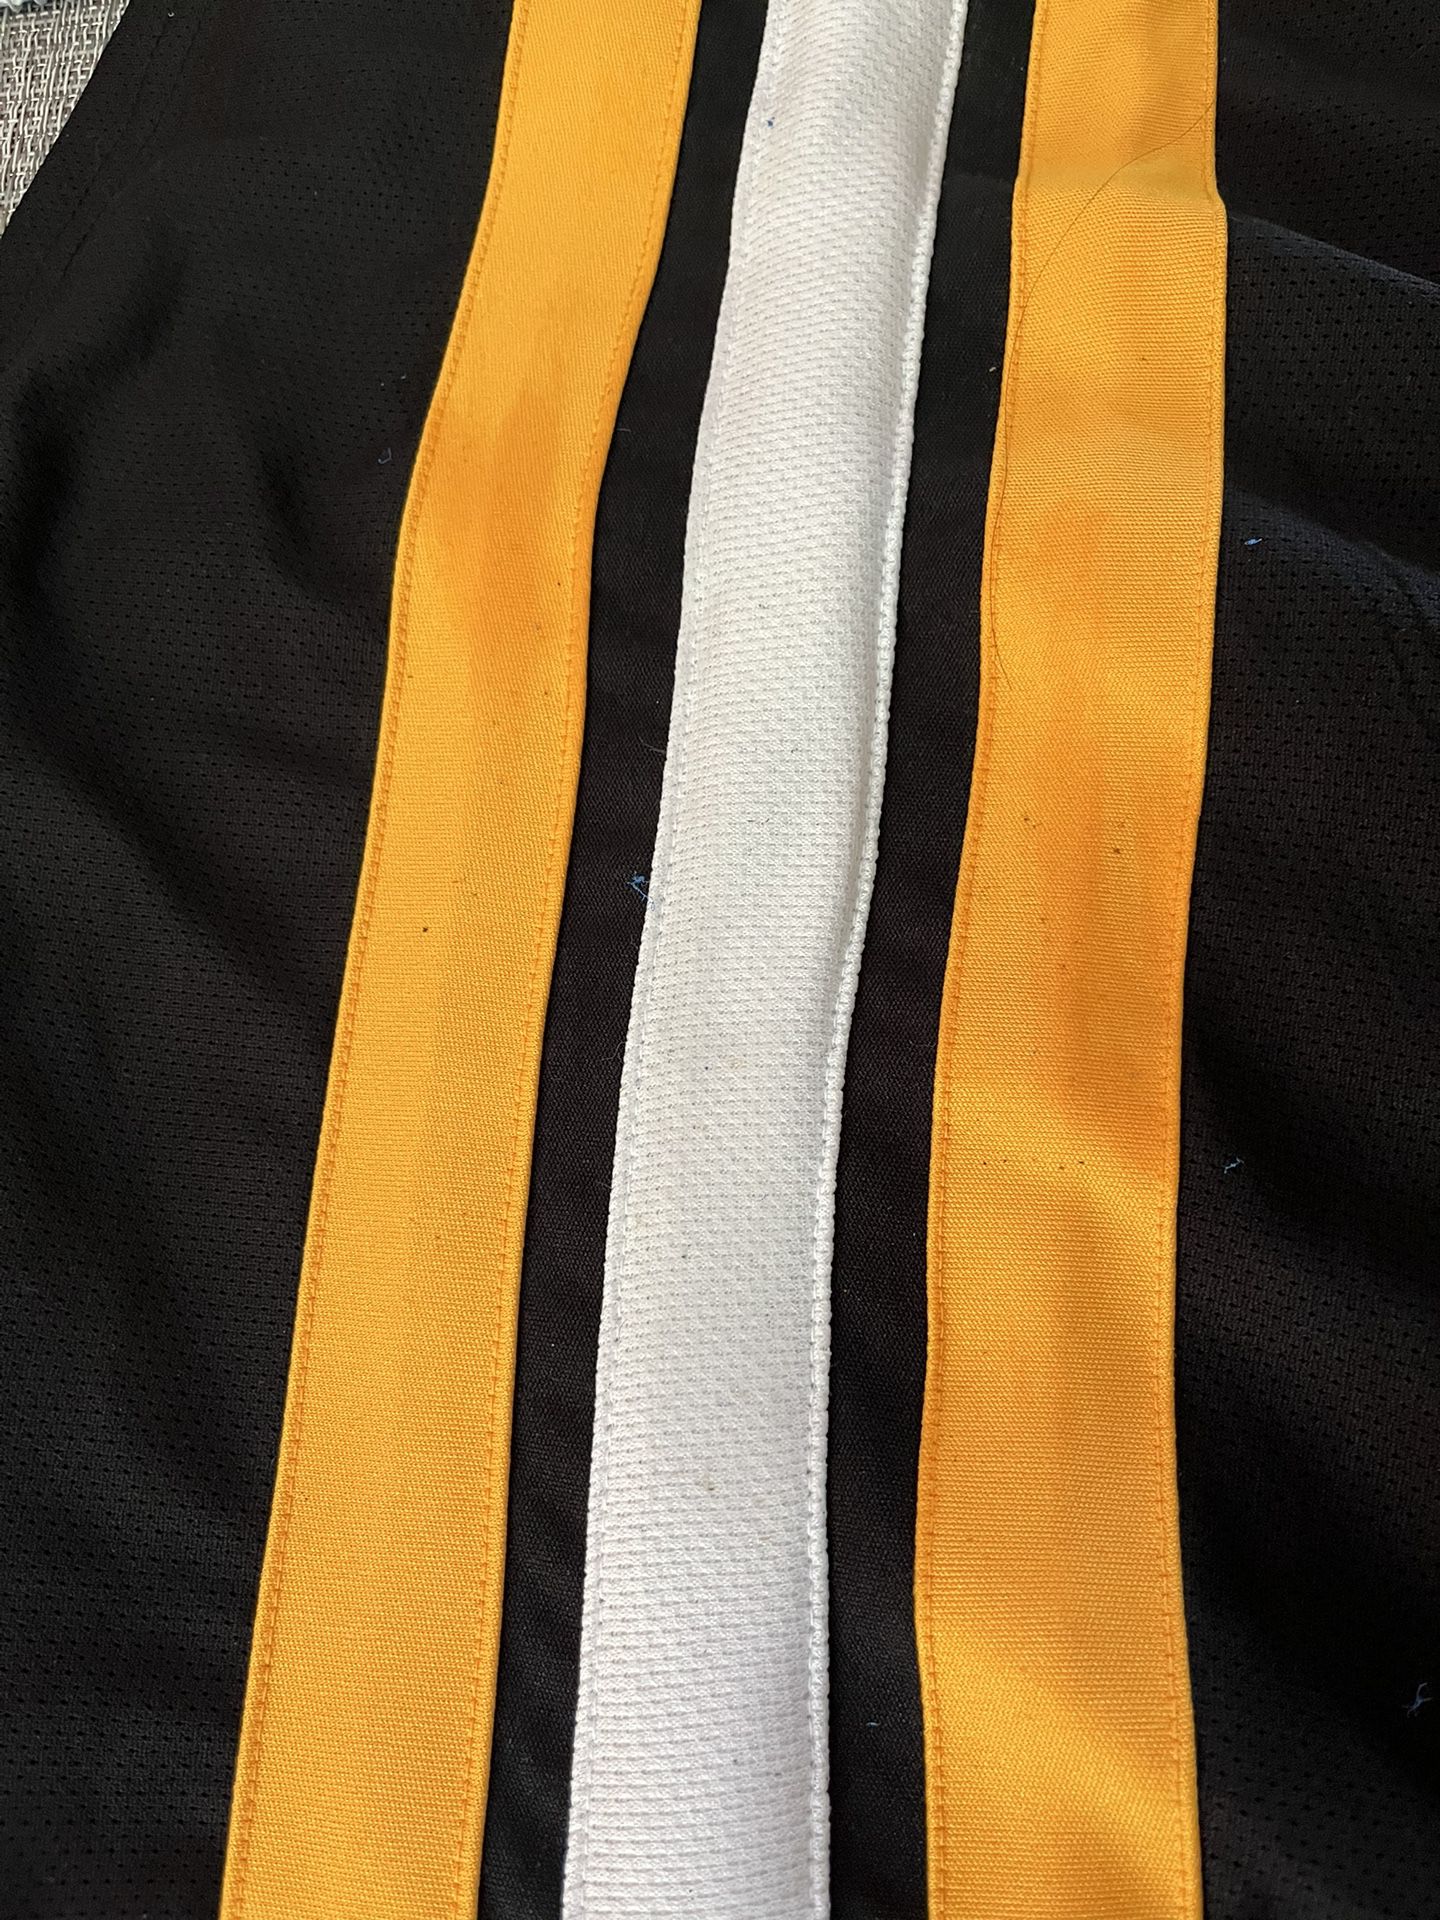 Boston Bruins Jersey XL for Sale in East Providence, RI - OfferUp